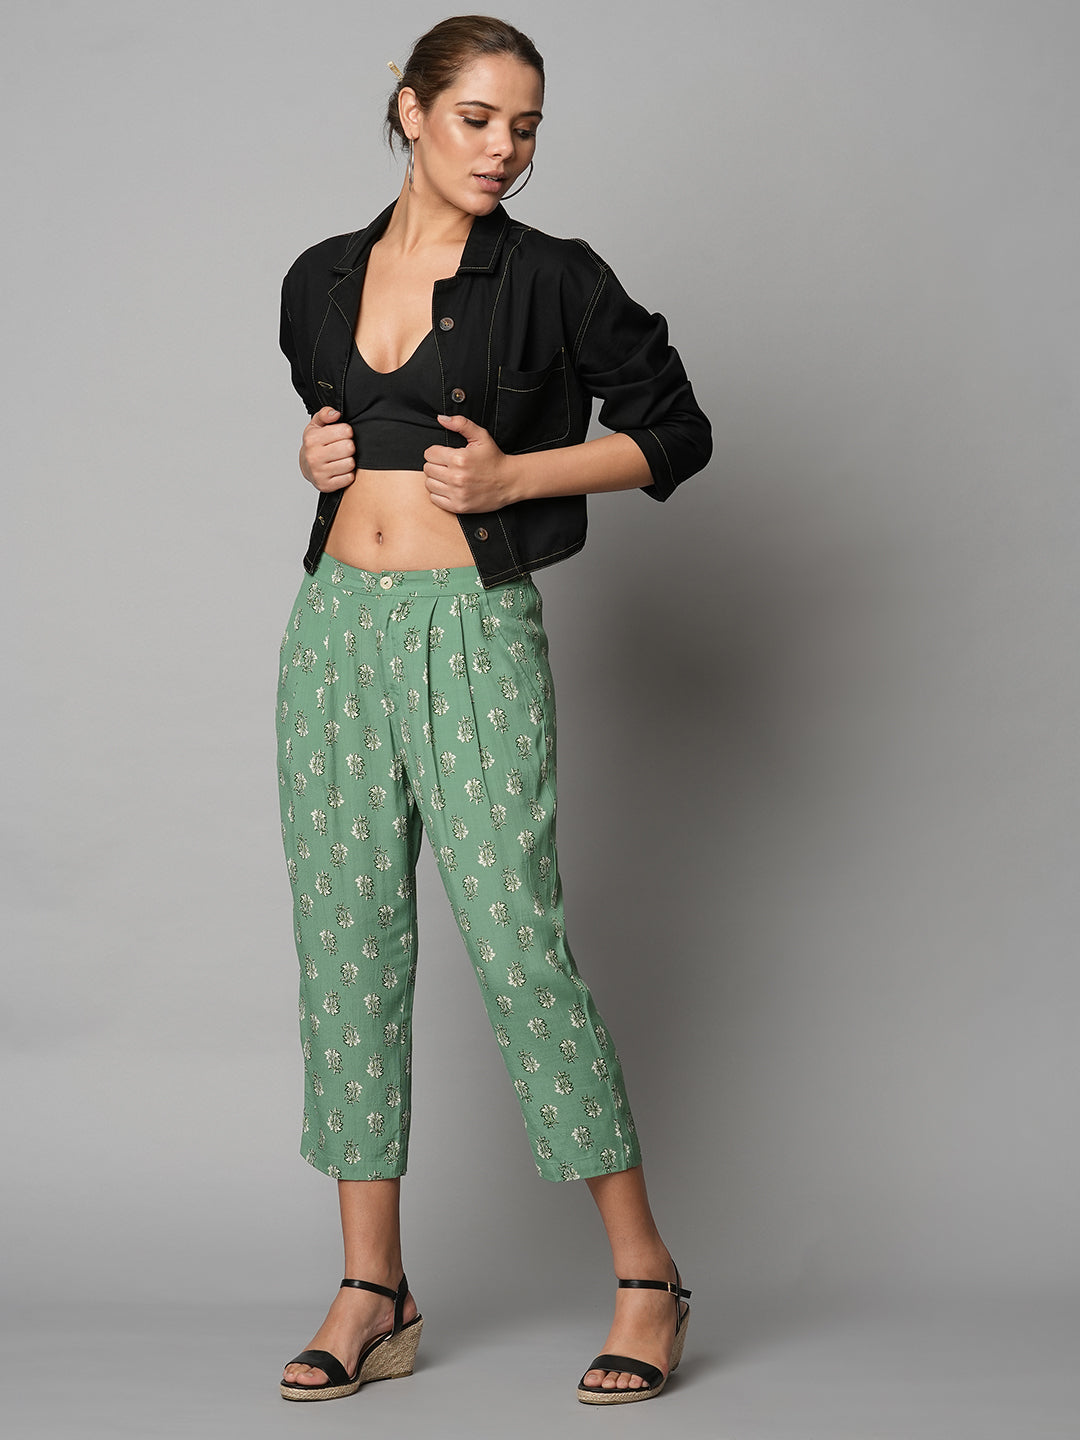 Viscose Crepe Butti Printed Pleated Cropped Pants